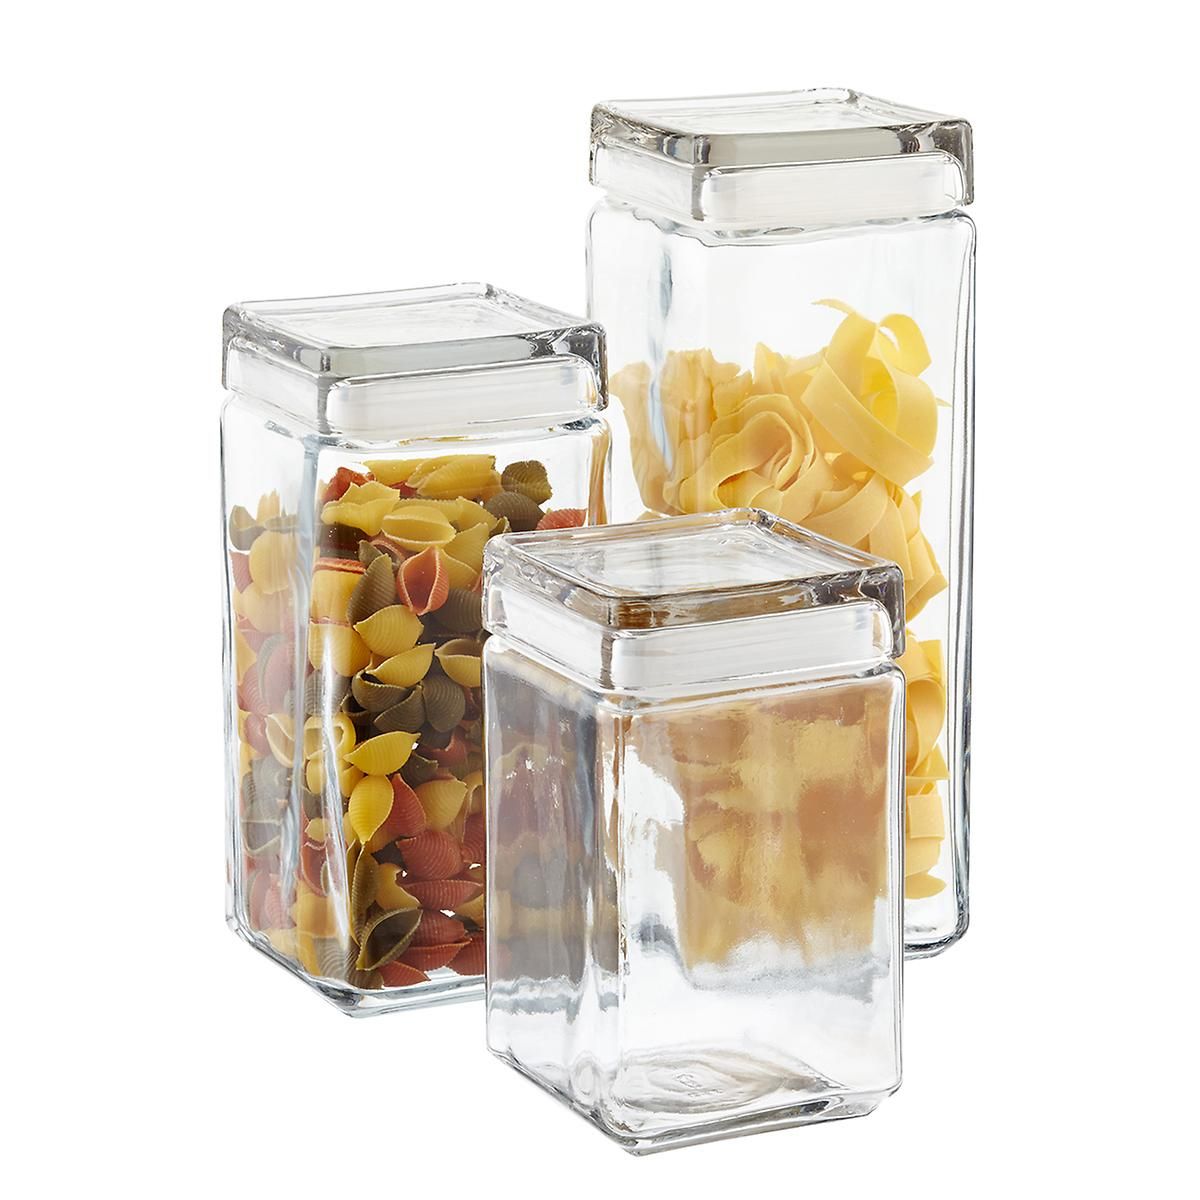 Anchor Hocking Stackable Square Glass Canisters | The Container Store